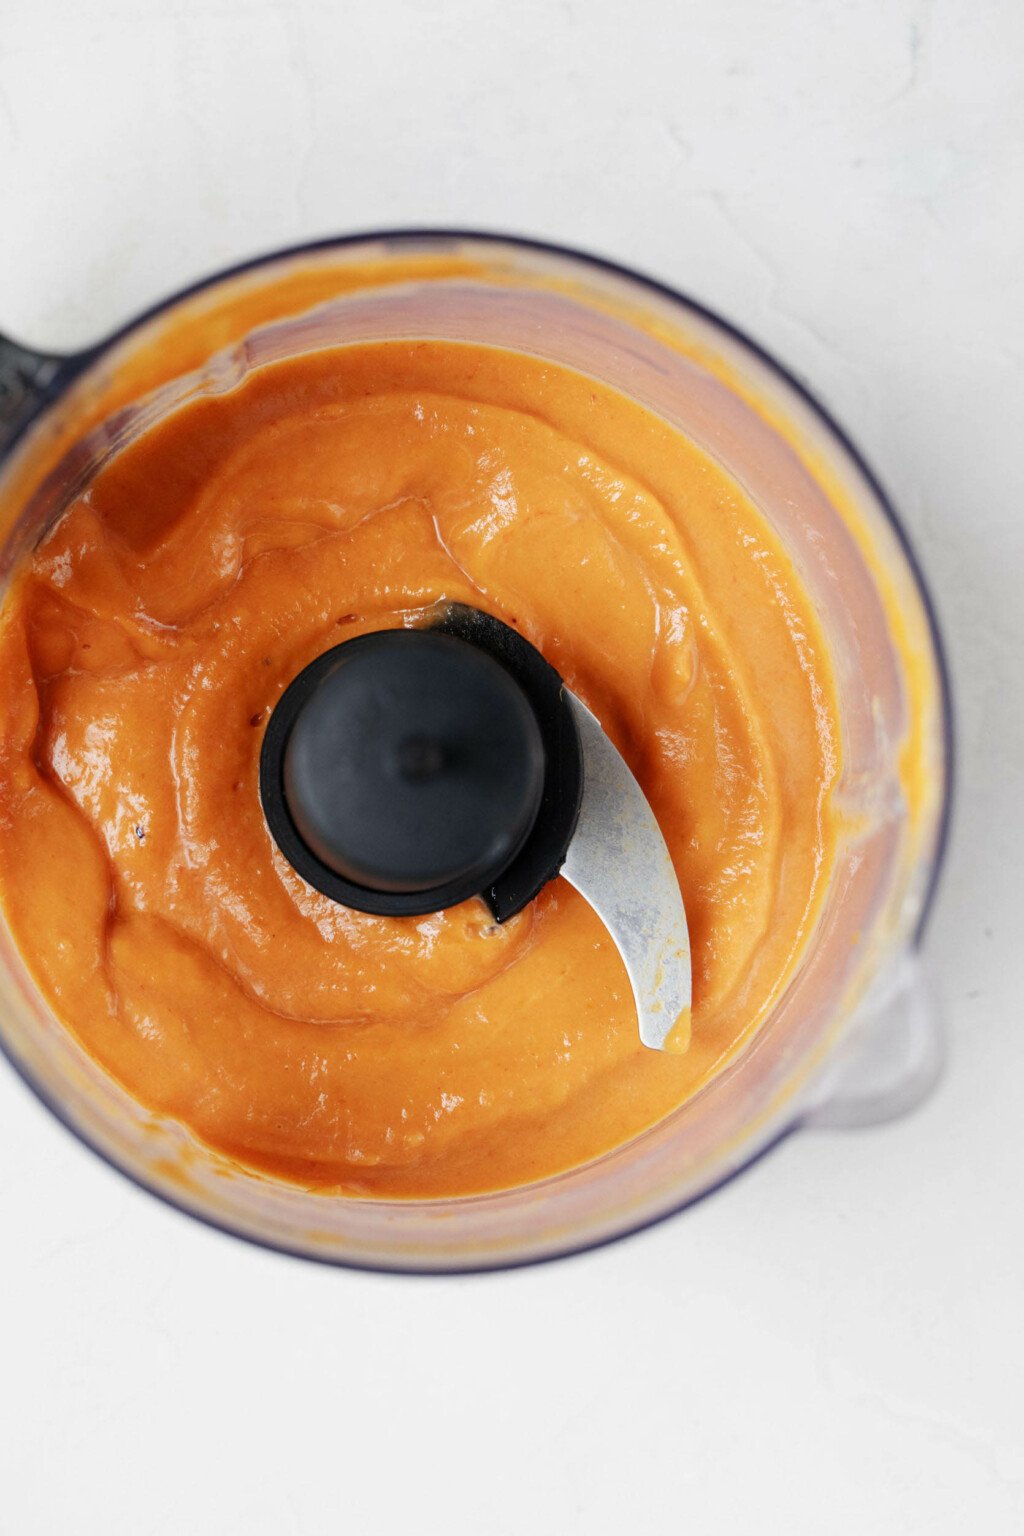 The bowl of a food processor is filled with a pink and orange hued sauce with a creamy consistency.